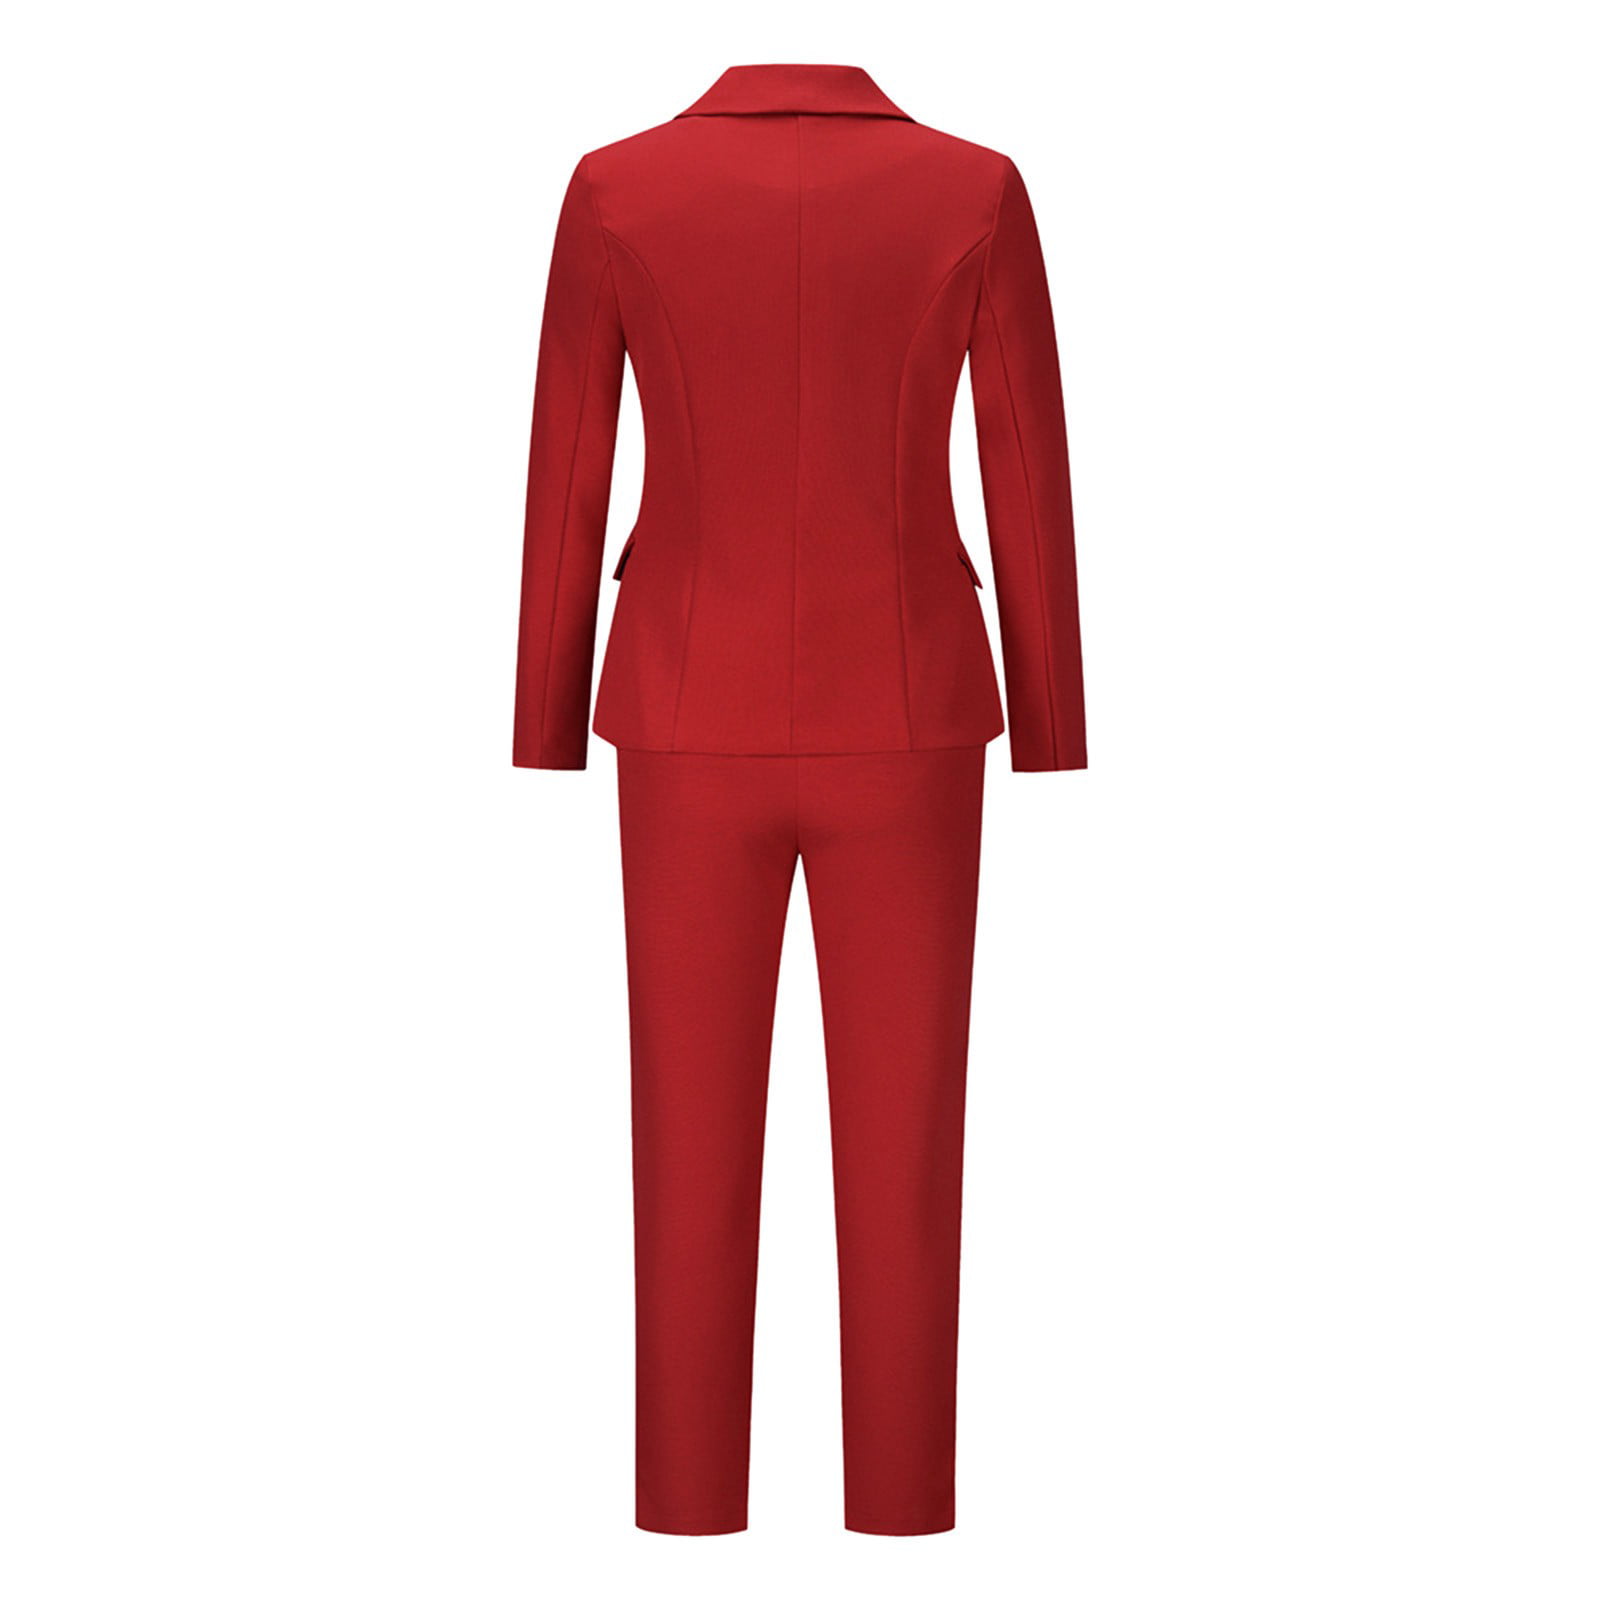 HSMQHJWE Pant Suits For Women Dressy Wedding Guest Life Party Romper Womens  Casual Light Weight Thin Jacket Slim Coat And Trousers Long Sleeve Blazer